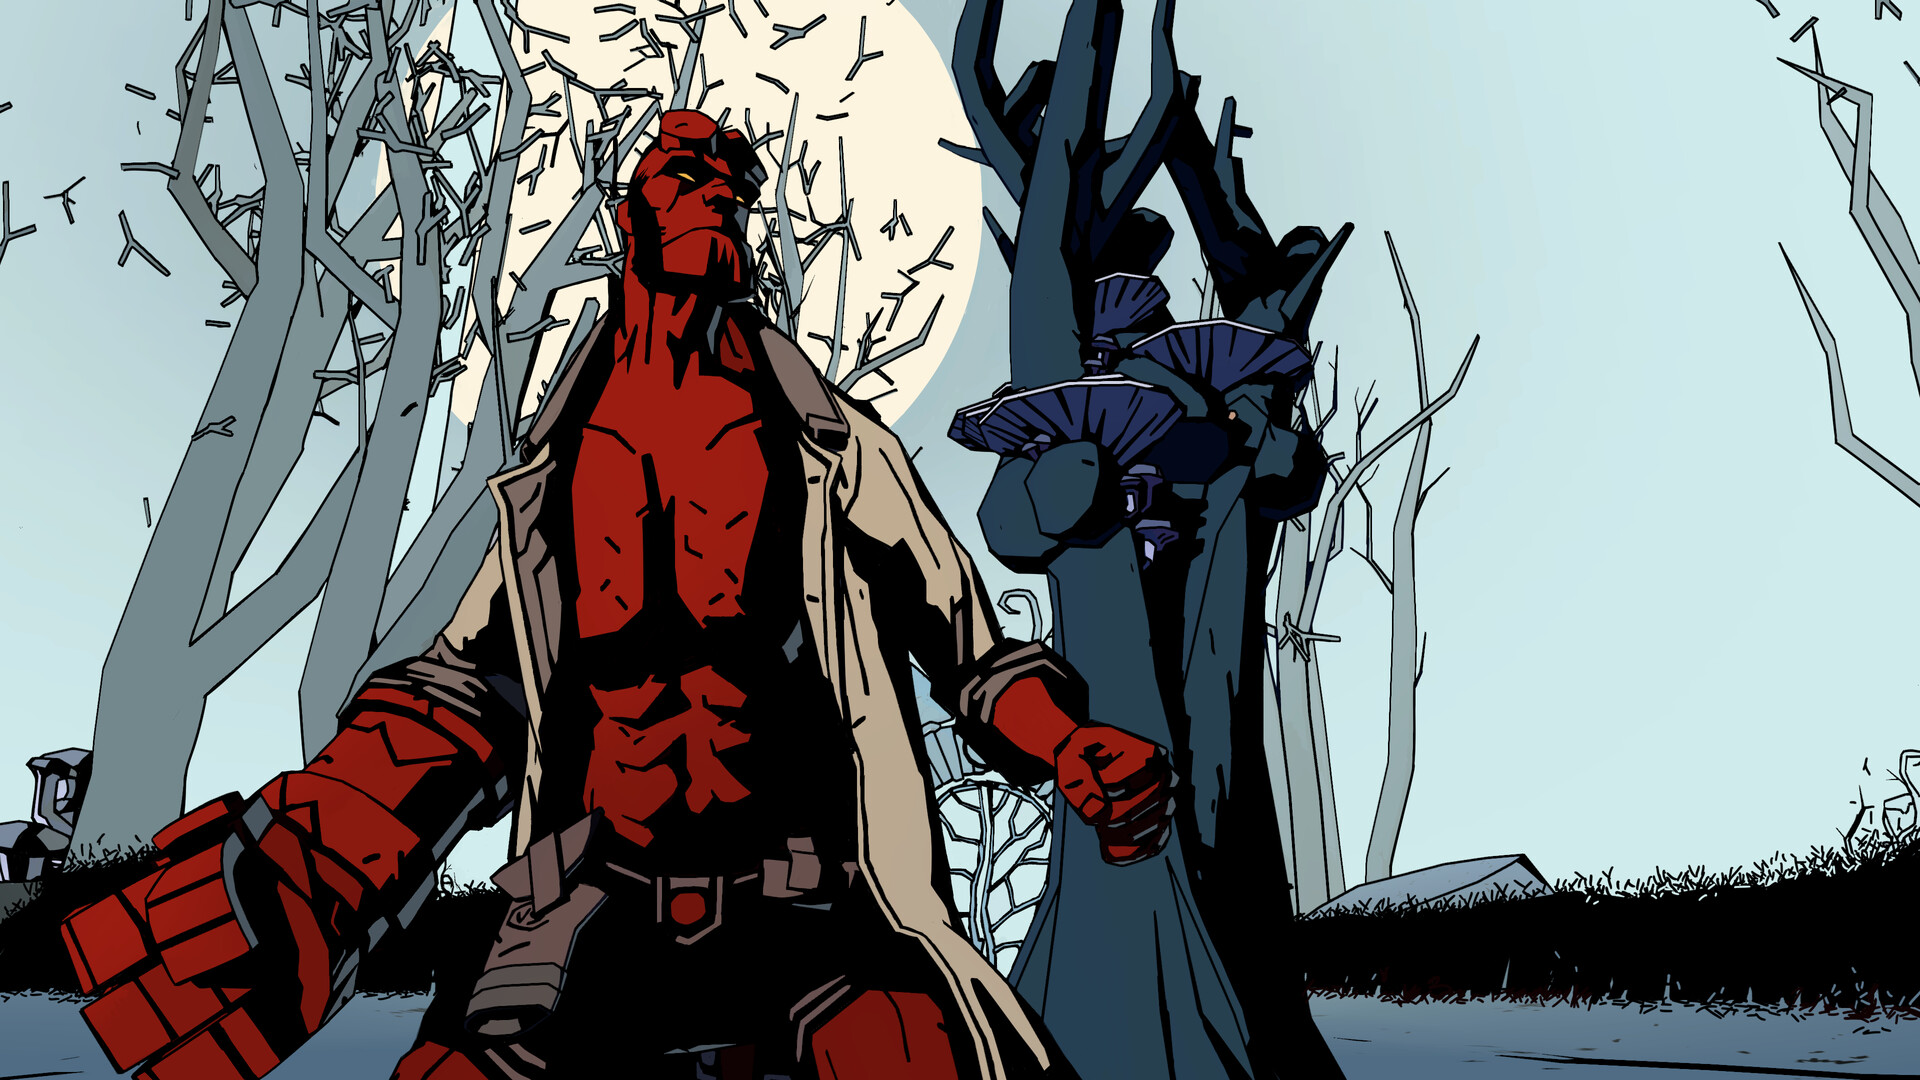 A new game about the red demon Hellboy - Hellboy was announced at TGS 22: Web of Wyrd